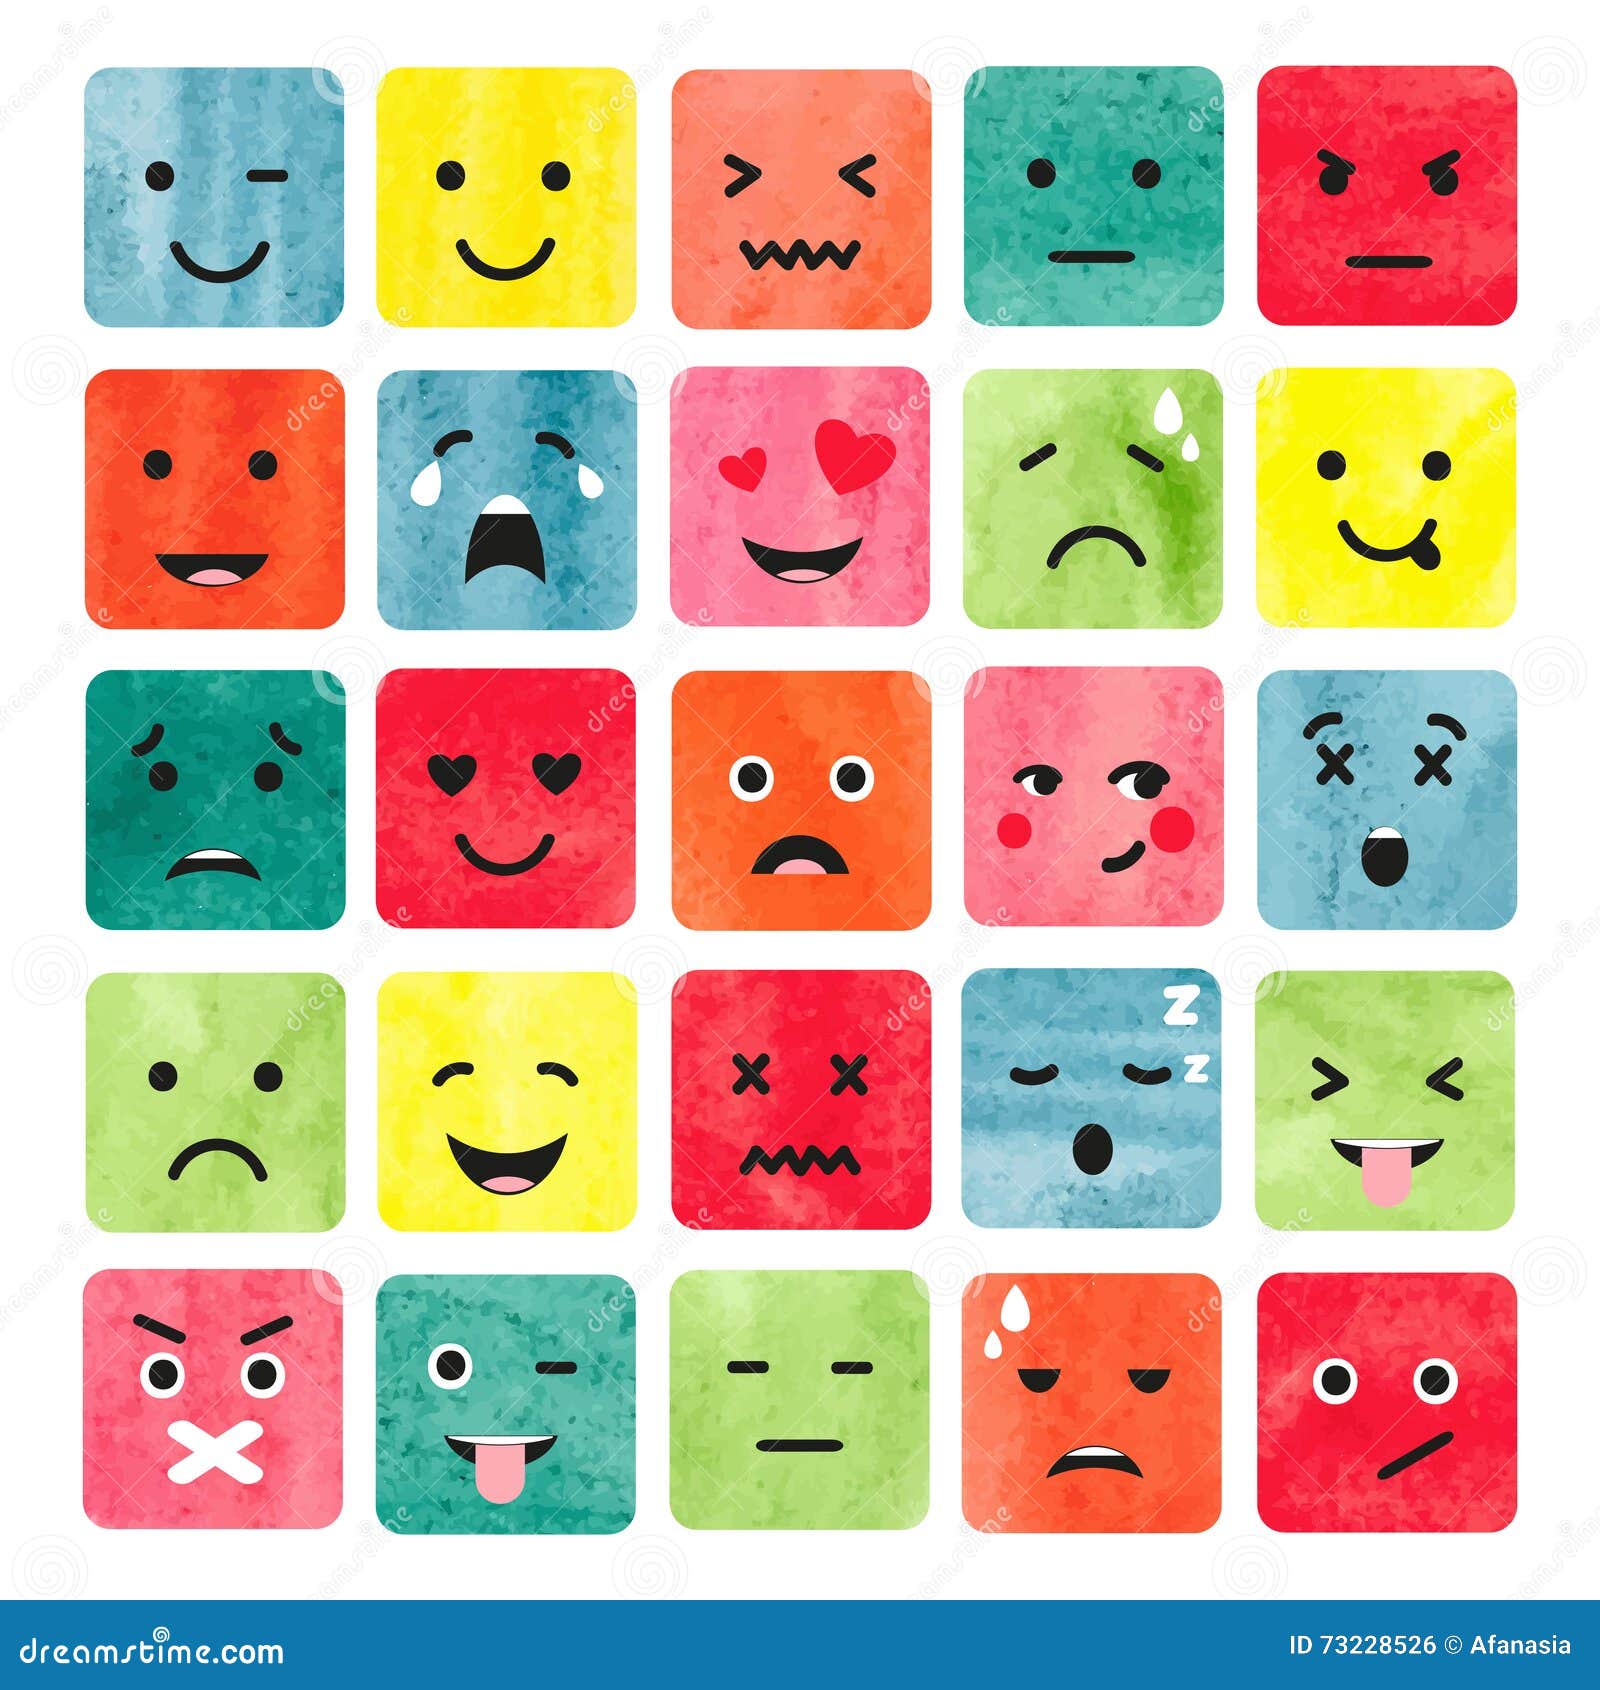 Watercolor Colorful Emoticons Set. Stock Vector - Illustration of ...